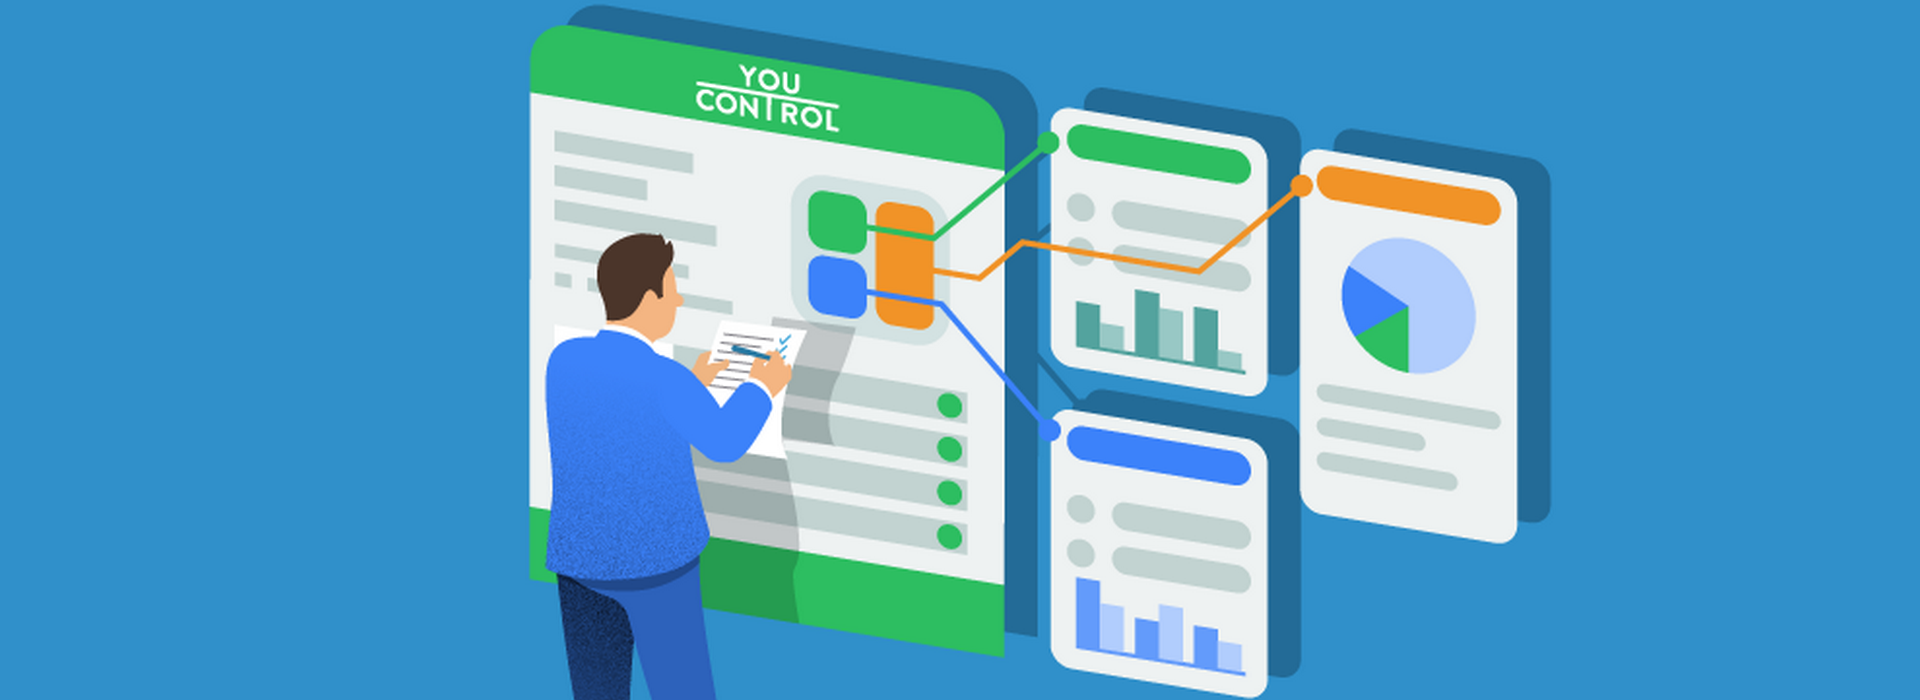 3 Tools from YouControl to Help Business Right Now